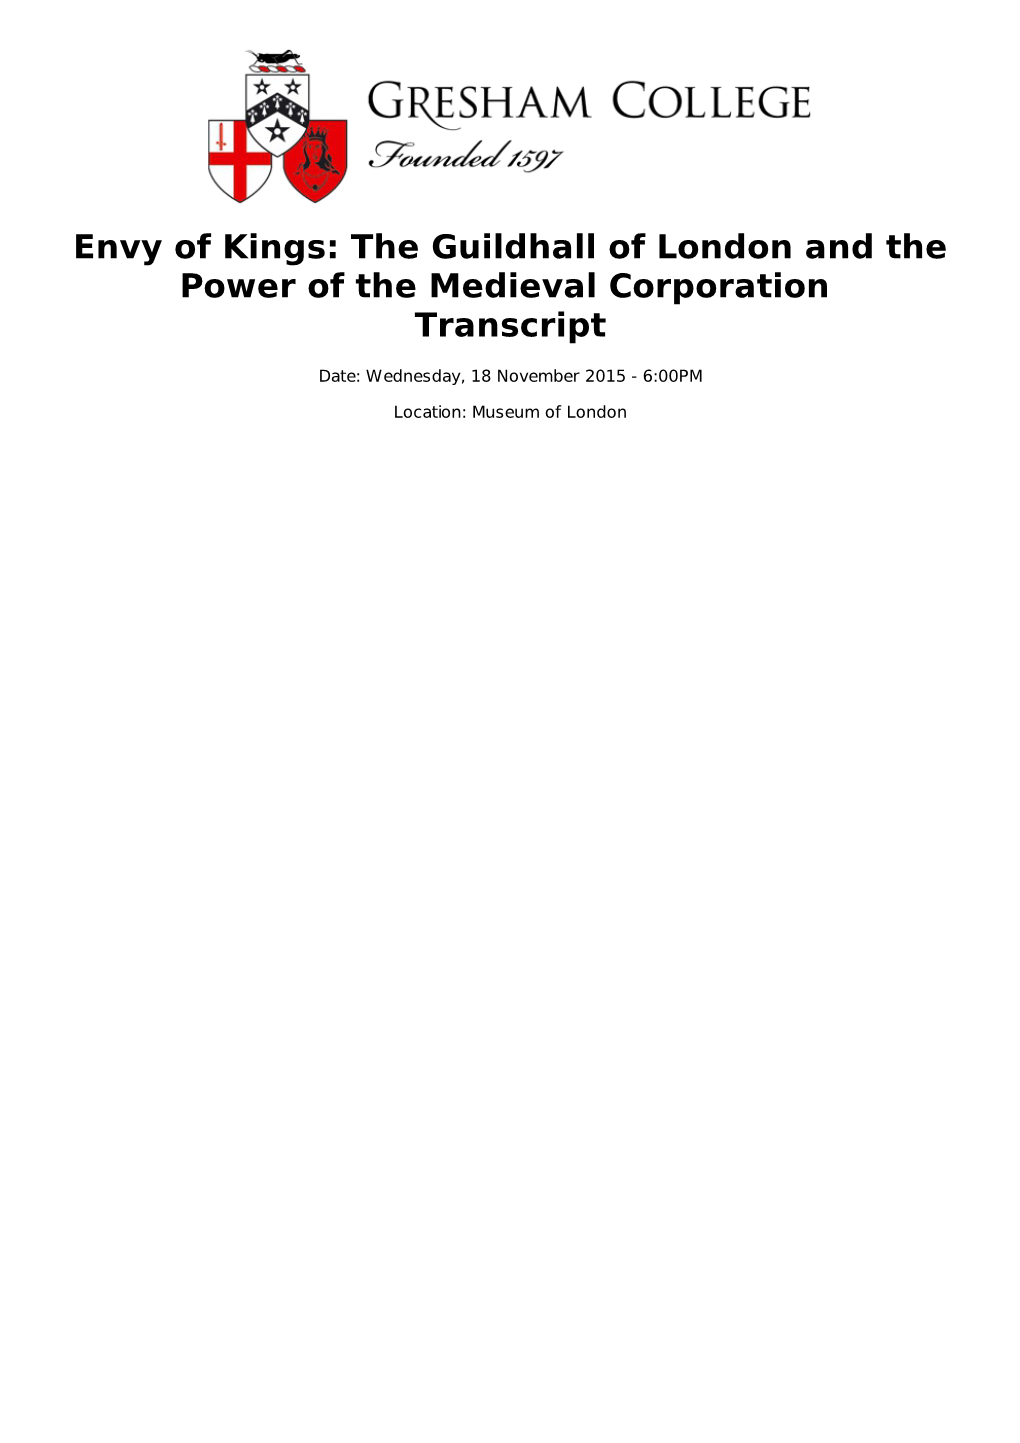 Envy of Kings: the Guildhall of London and the Power of the Medieval Corporation Transcript